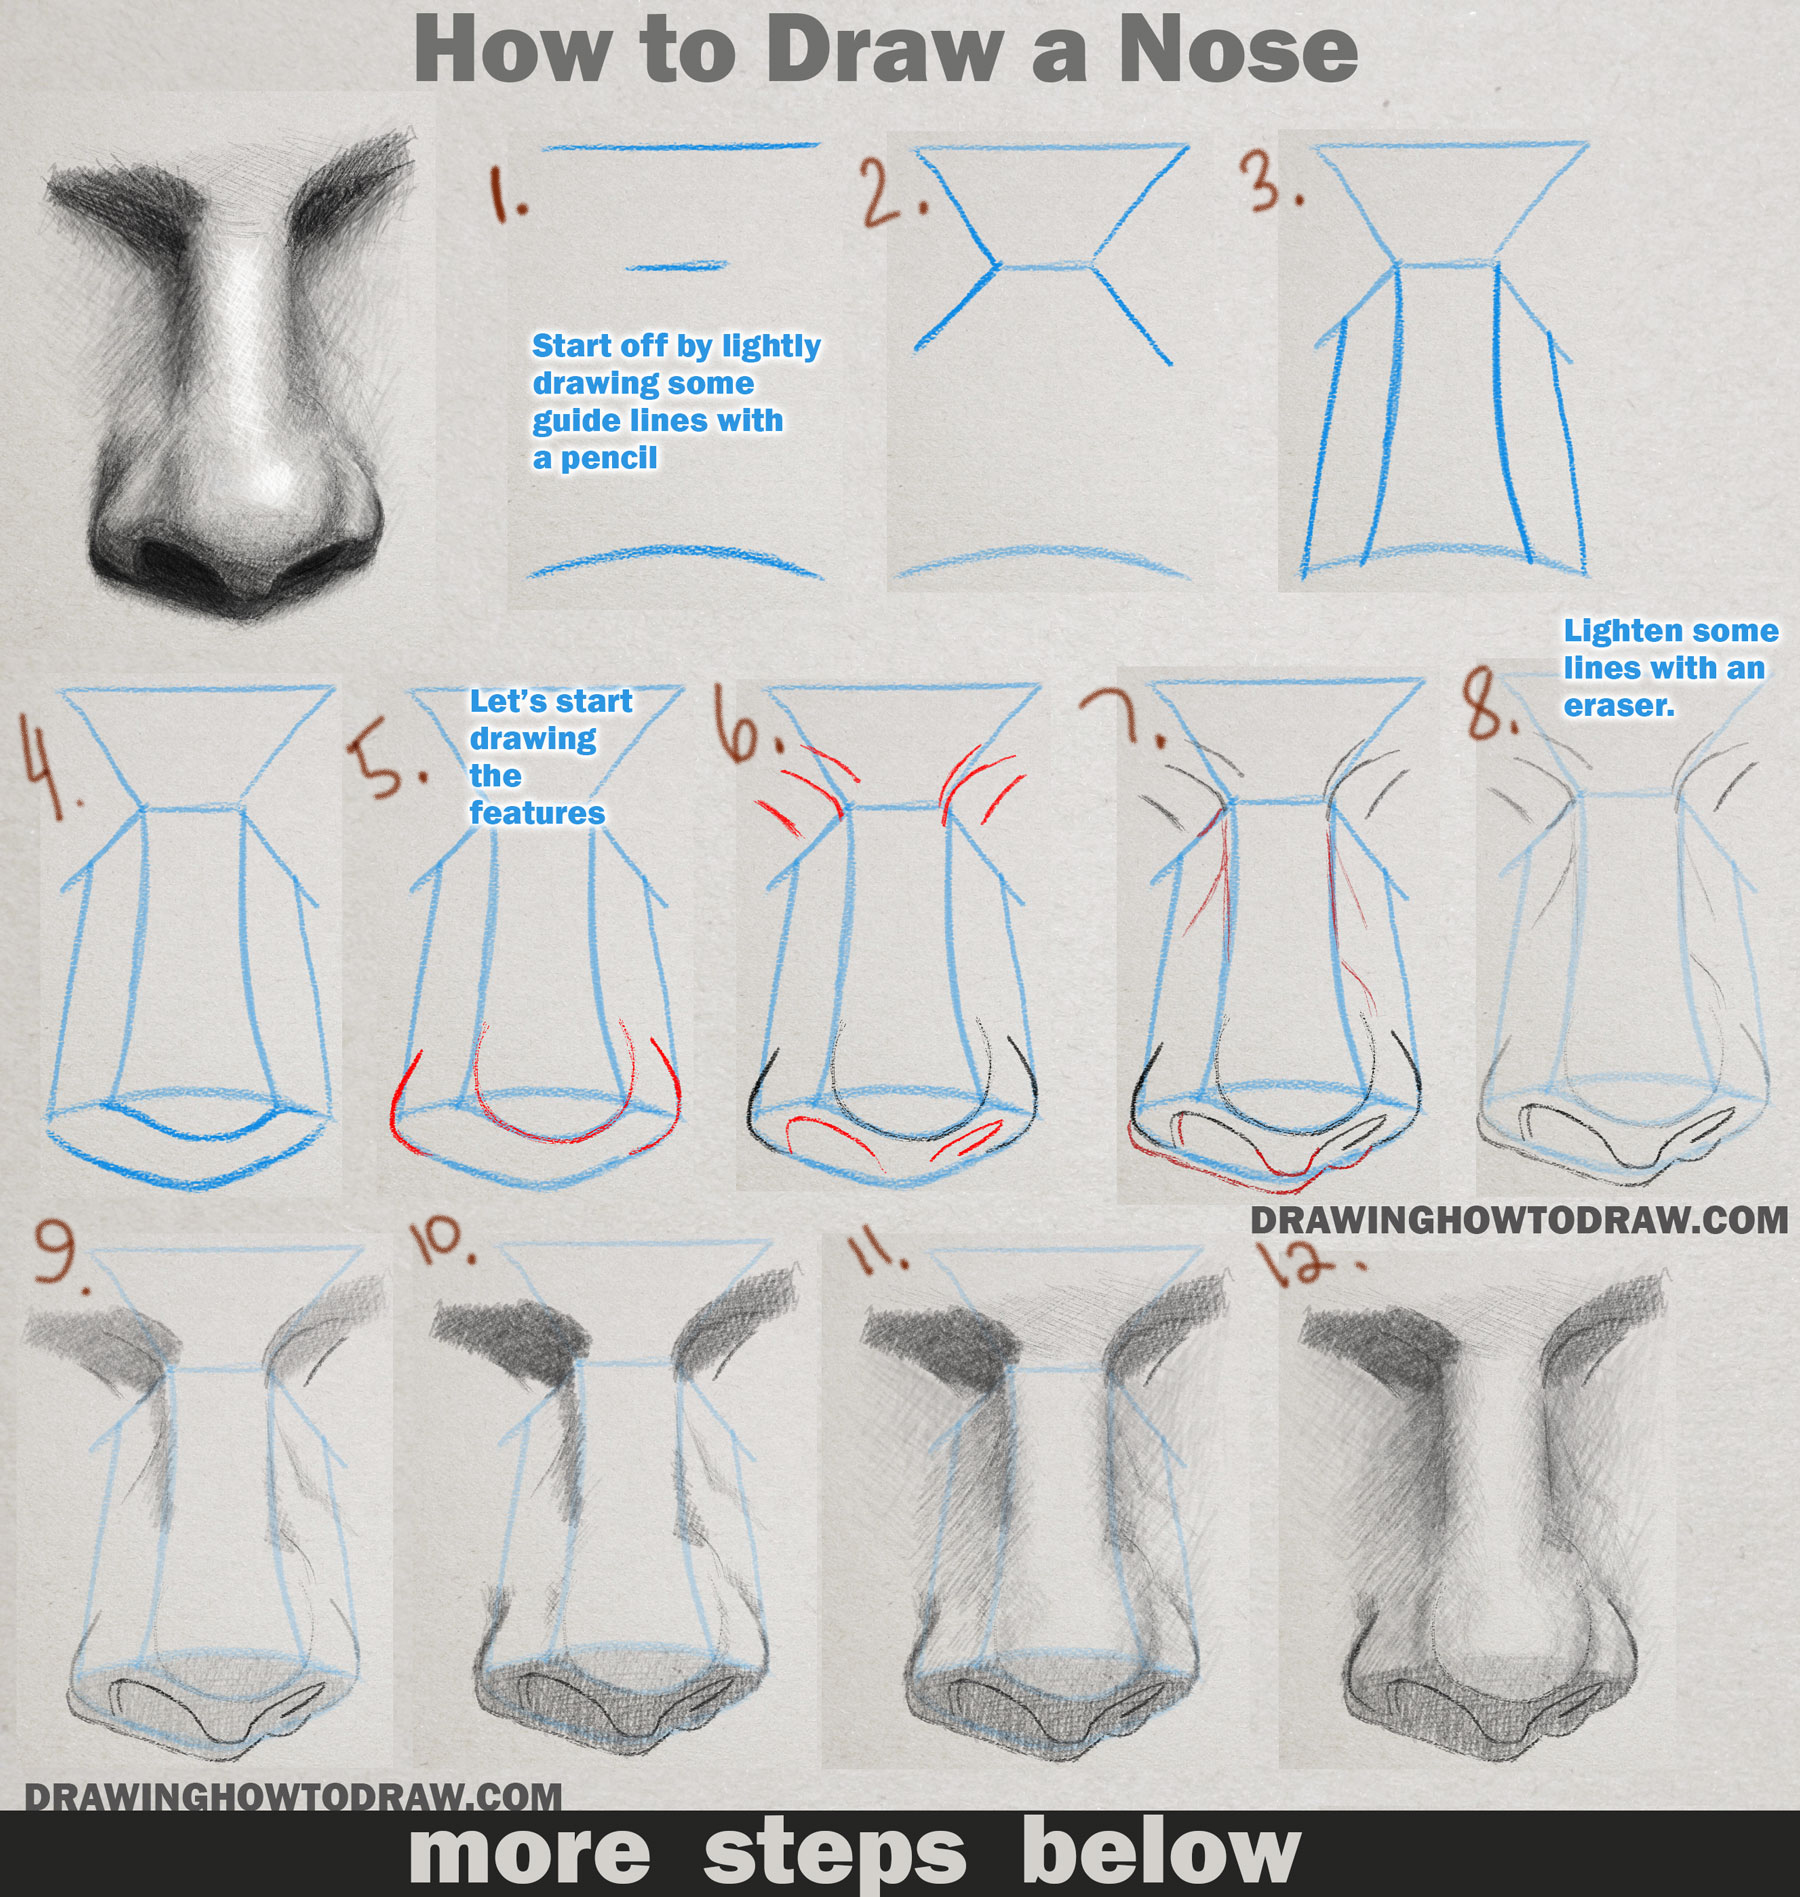 How to Draw and Shade a Realistic Nose in Pencil or Graphite Easy Step